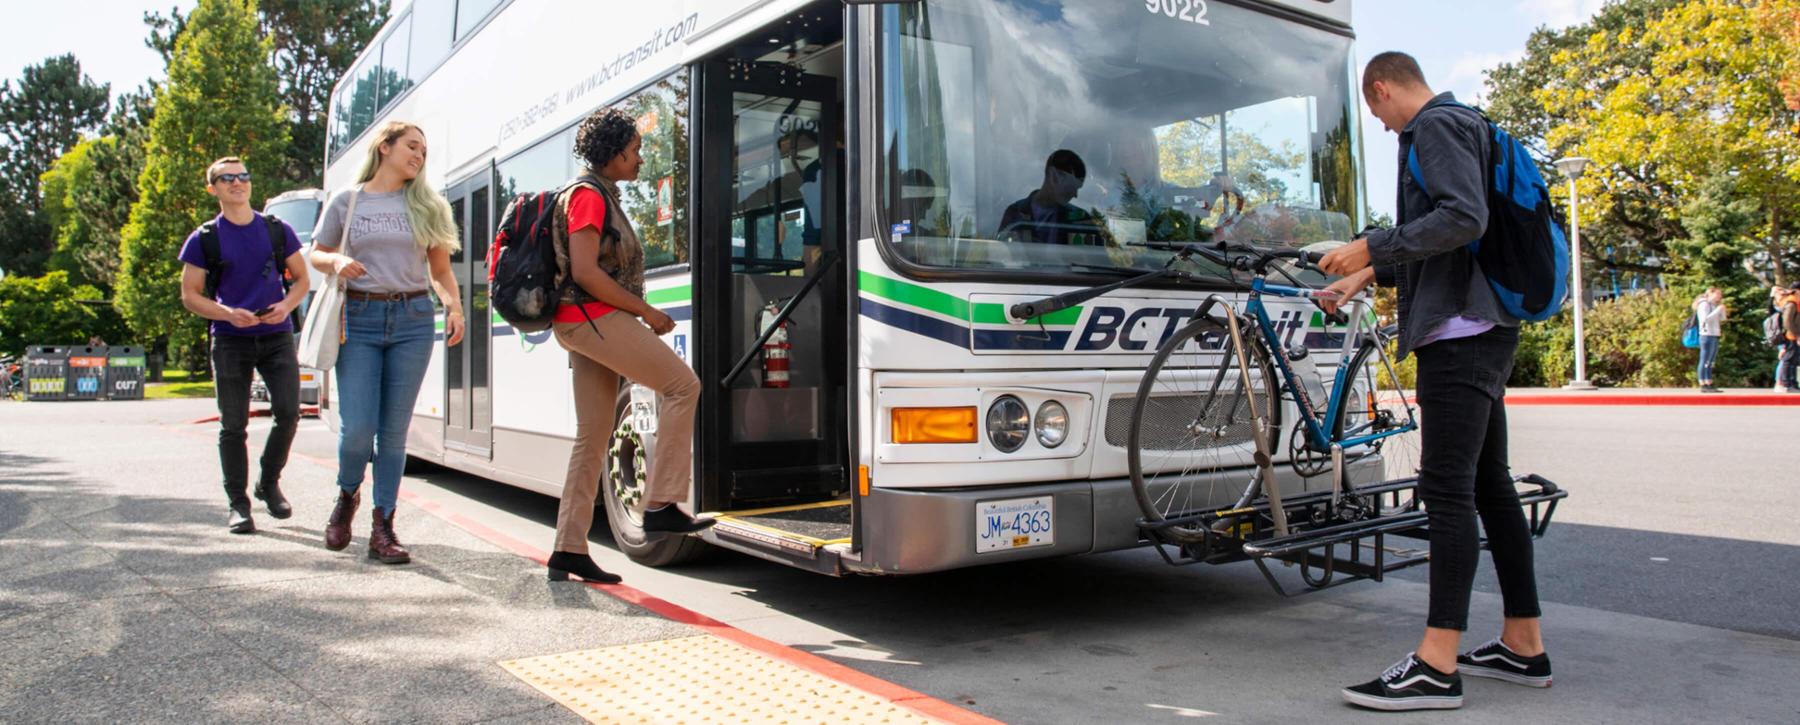 Students board a BC transit bus while another student places their bike on the front rack.